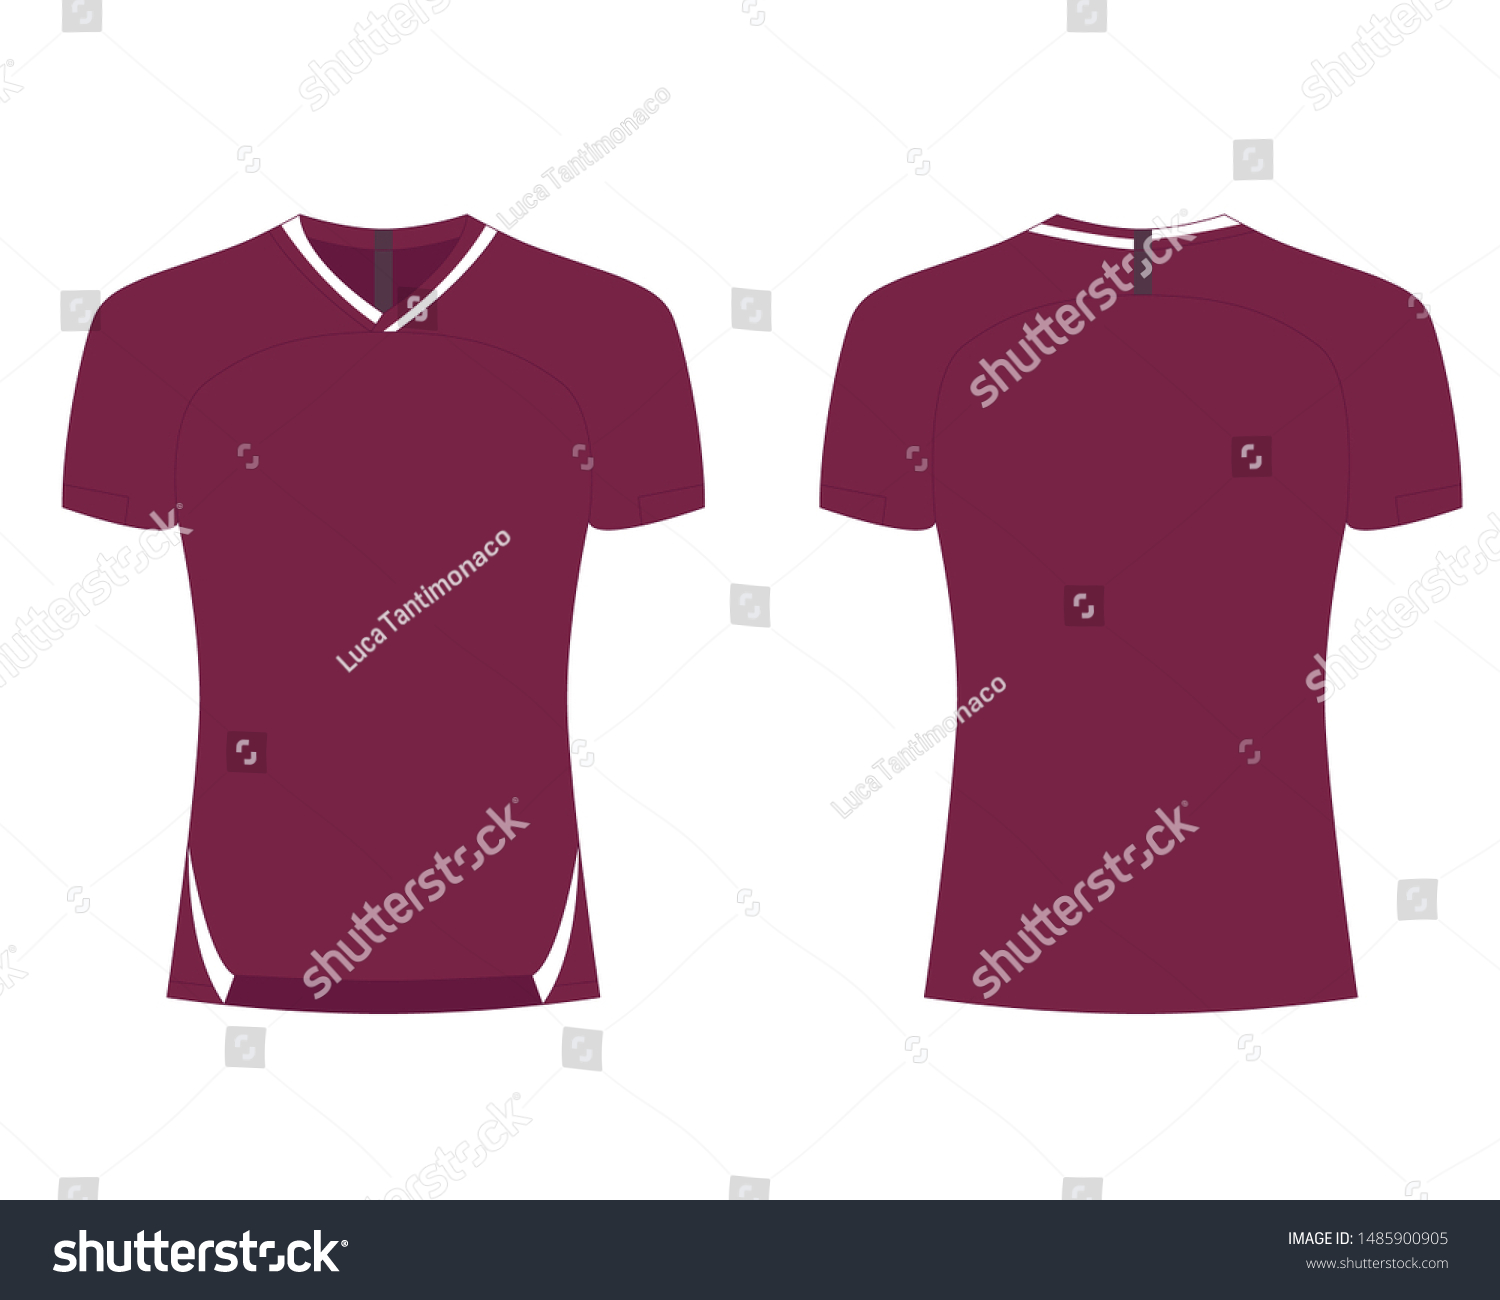 Download Tshirt Sport Design Template Rugby Jersey Stock Vector Royalty Free 1485900905